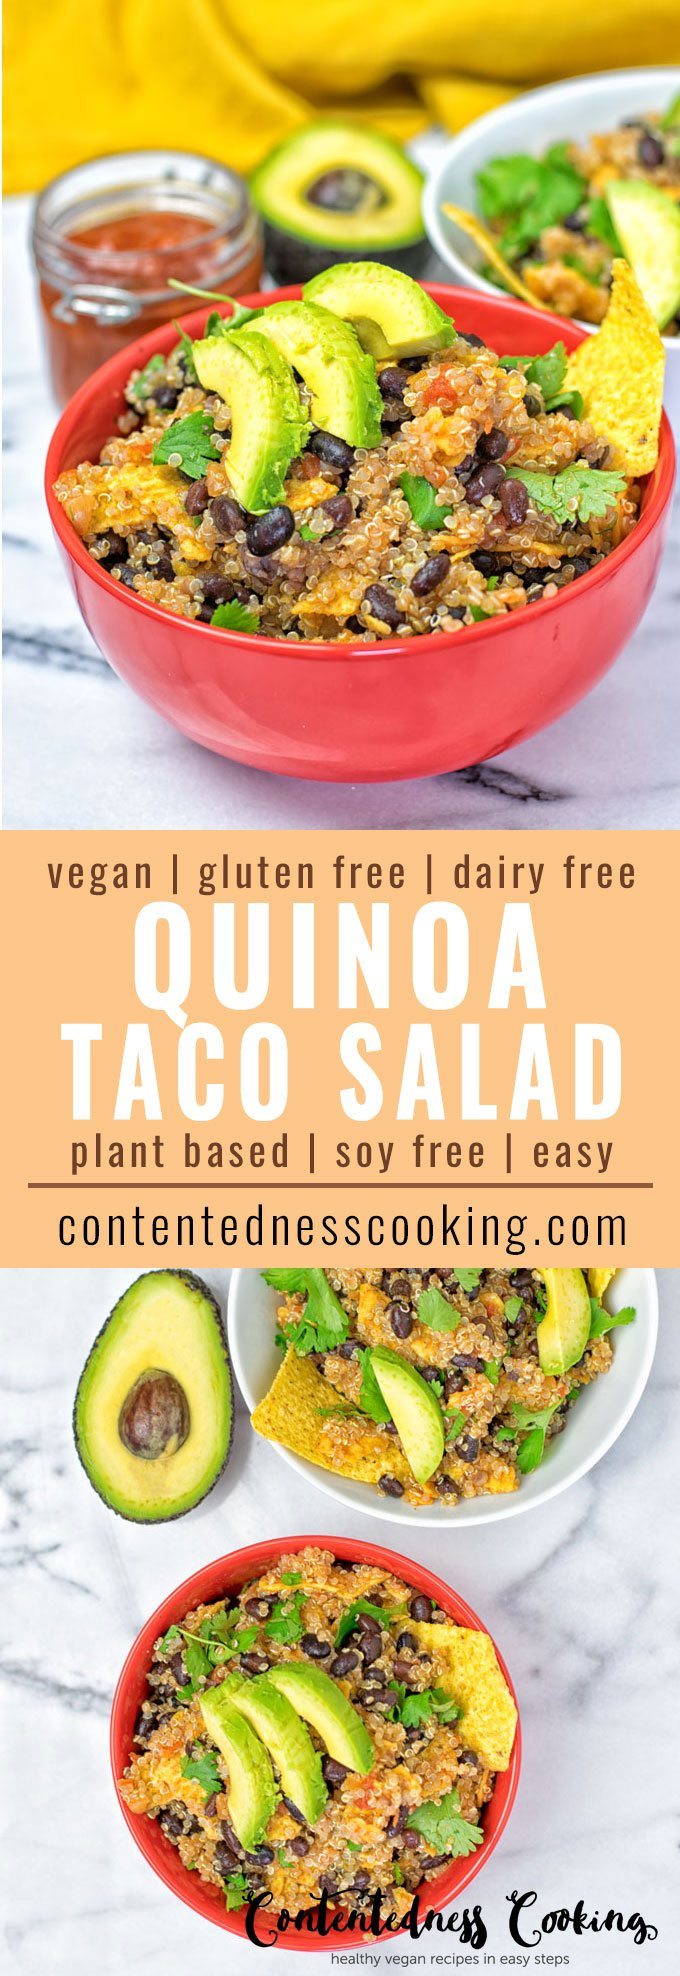 Collage of two pictures of the Quinoa Taco Salad with recipe title text.